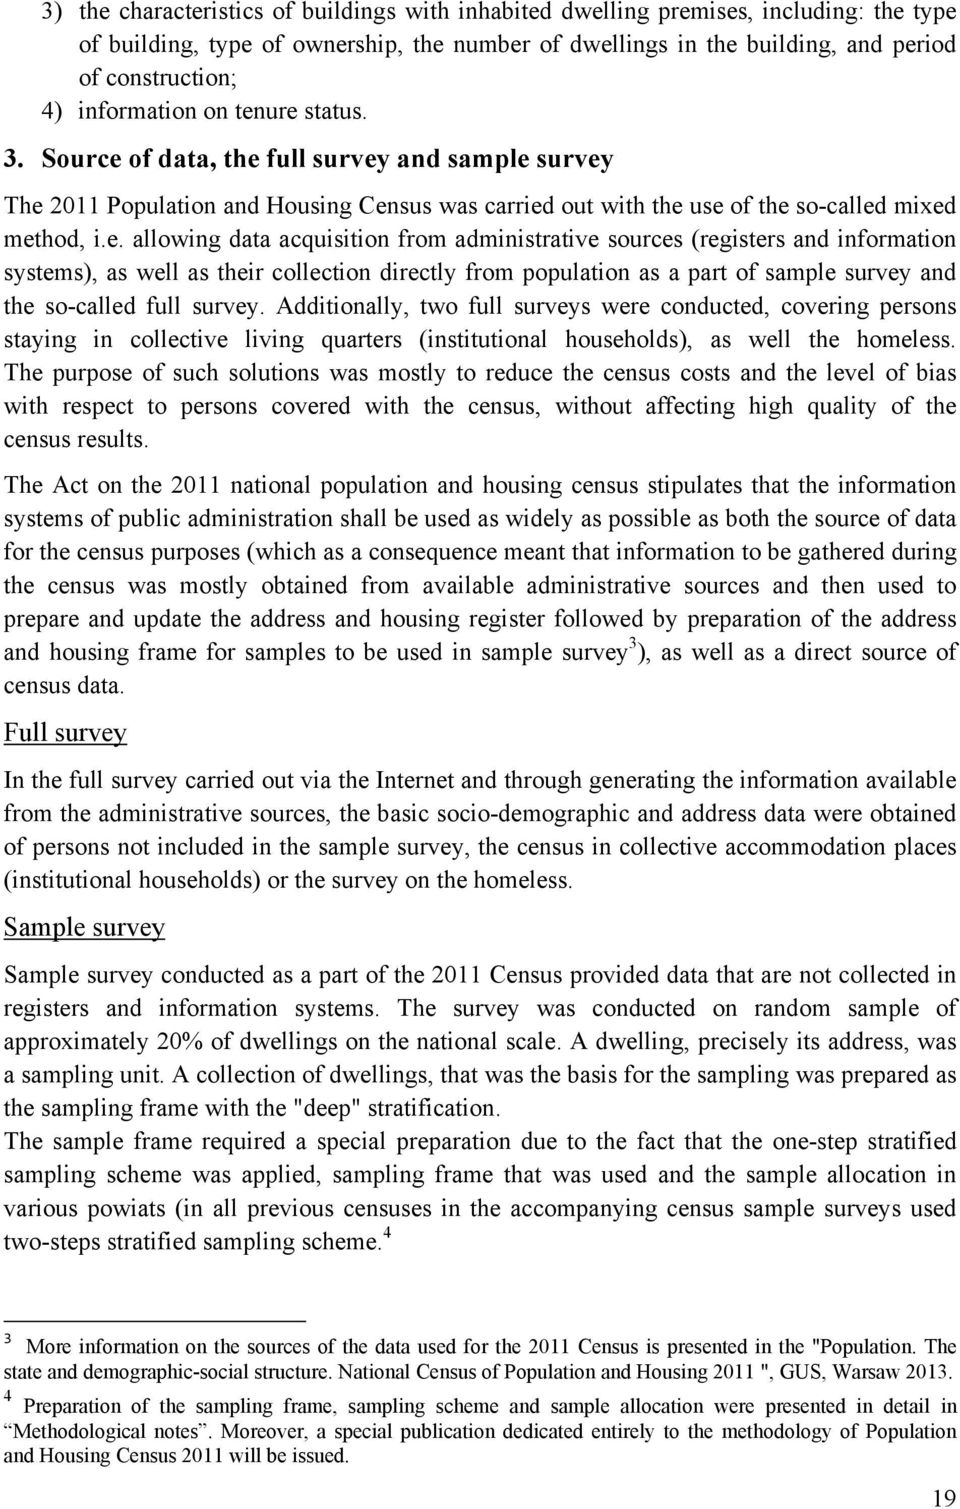 ure status. 3. Source of data, the full survey and sample survey The 2011 Population and Housing Census was carried out with the use of the so-called mixed method, i.e. allowing data acquisition from